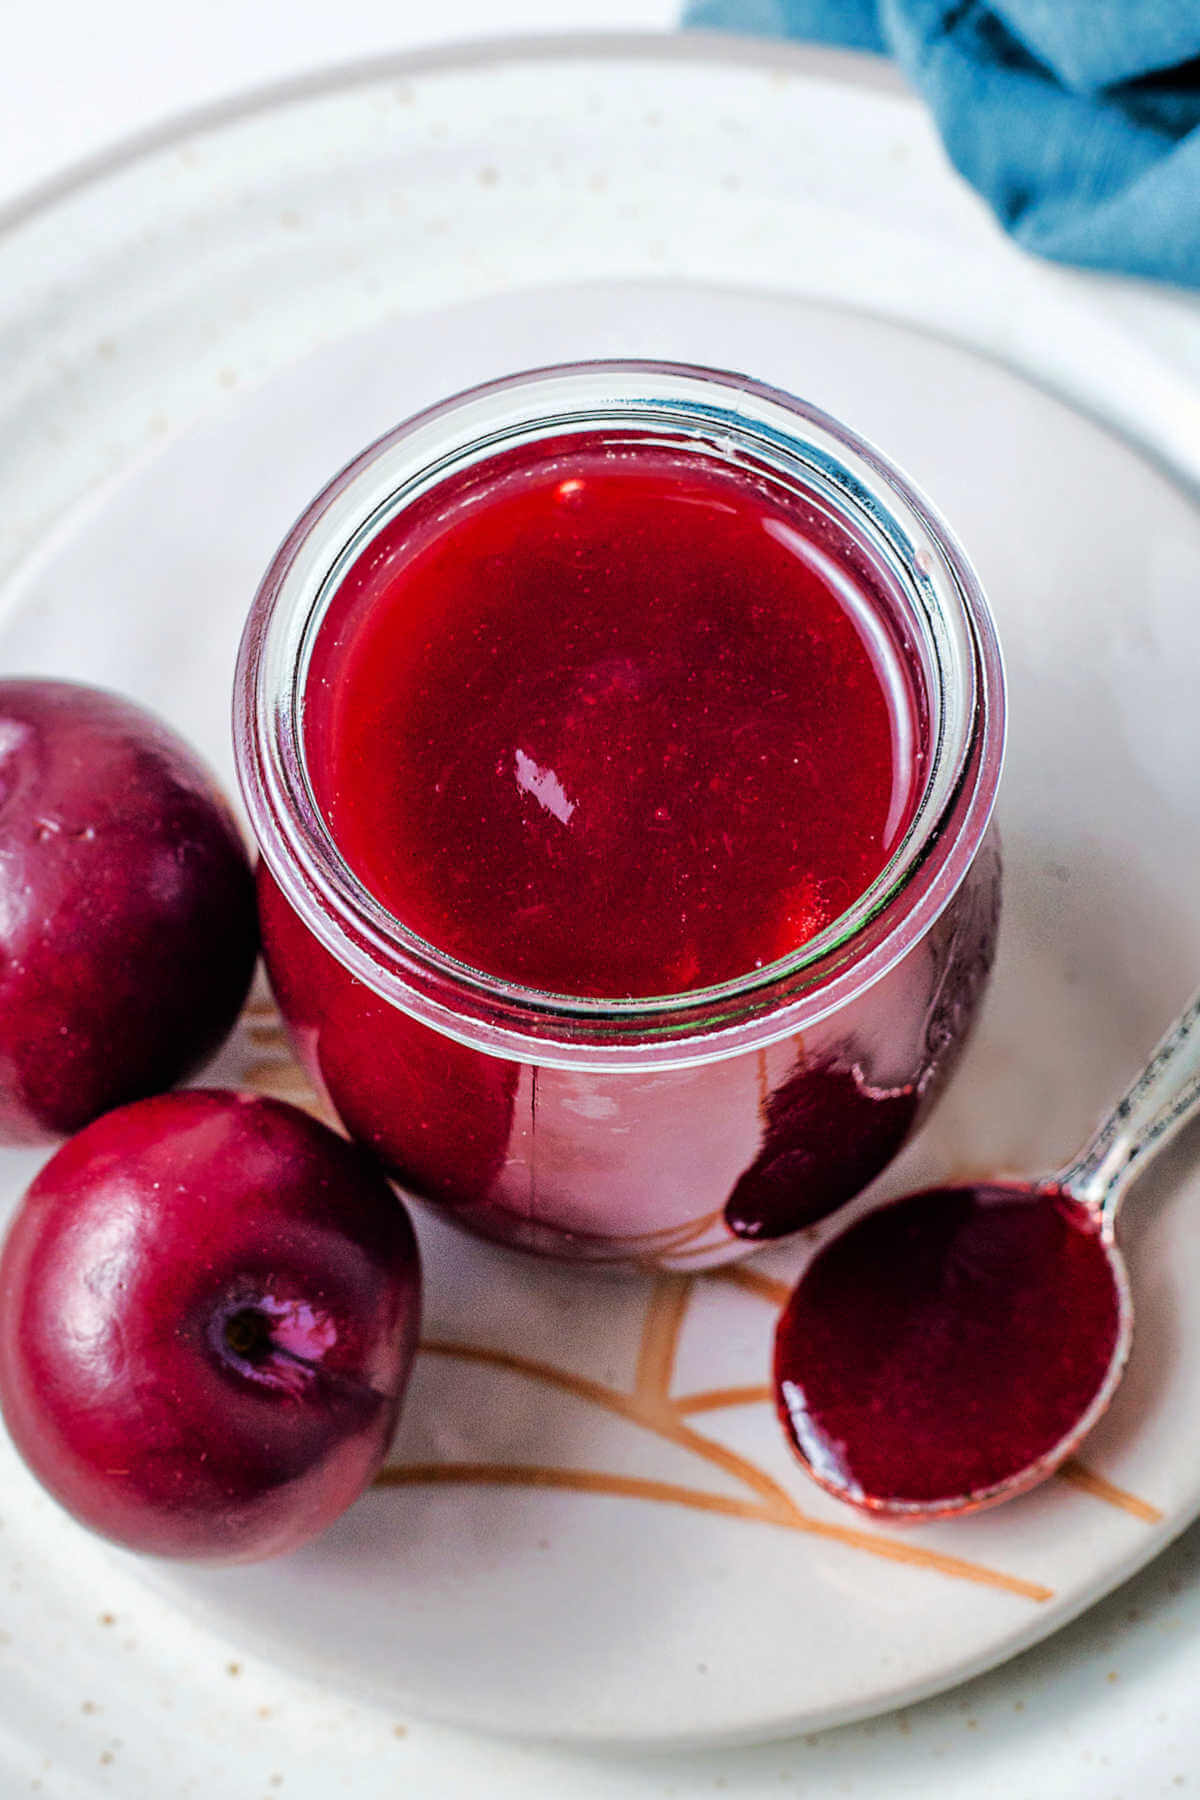 a jar of plum jam on a plate with a spoon and whole plums.